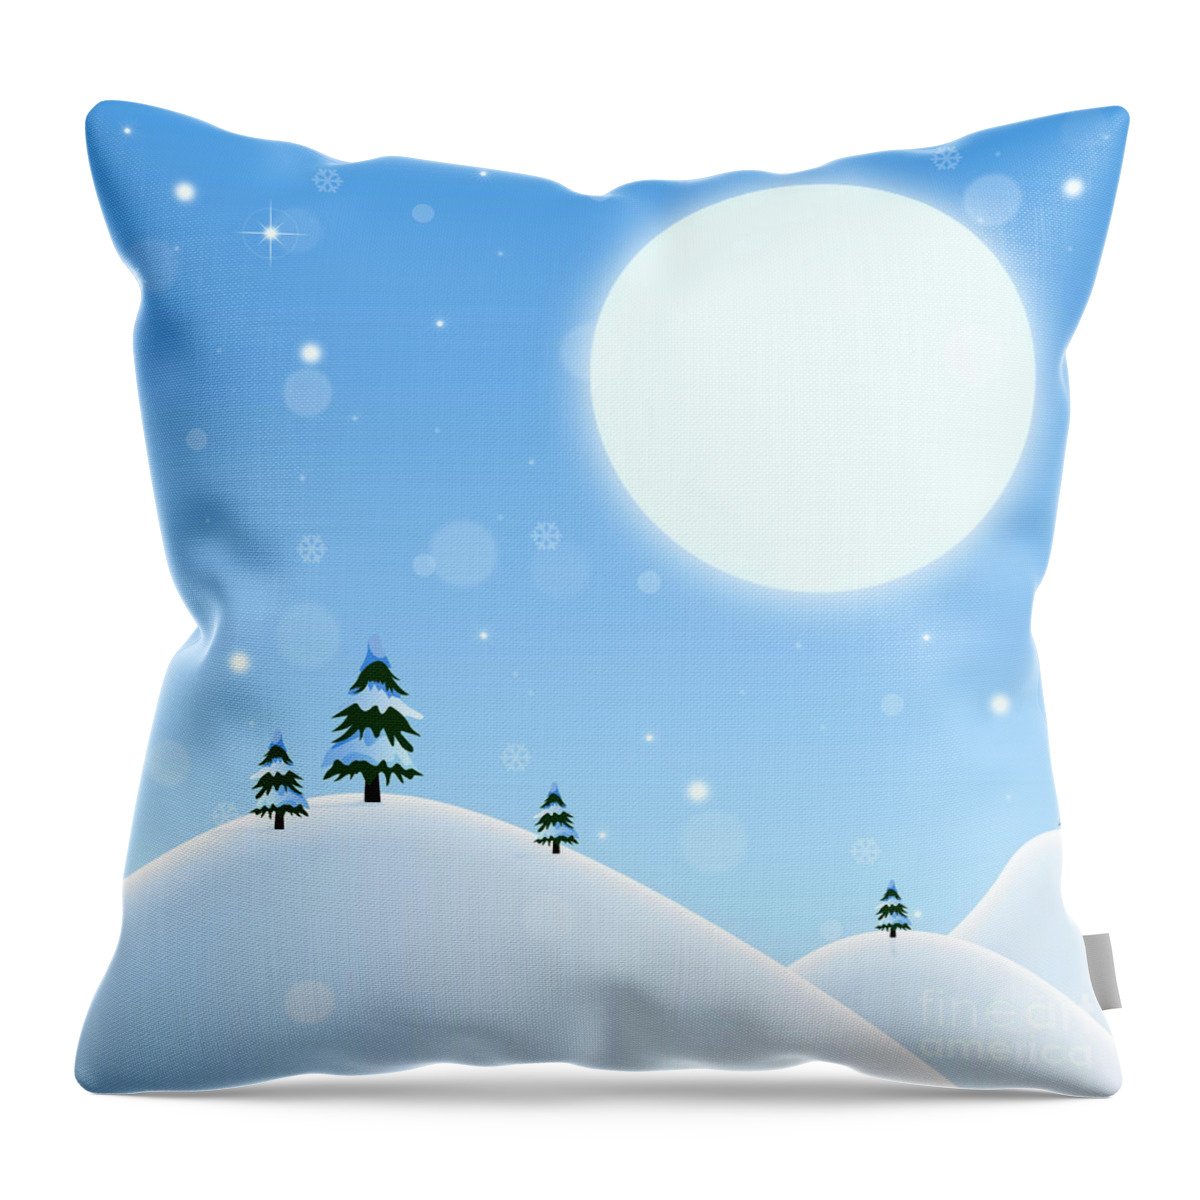 Full Moon Throw Pillow featuring the digital art Winter Snow Scene by Phil Perkins